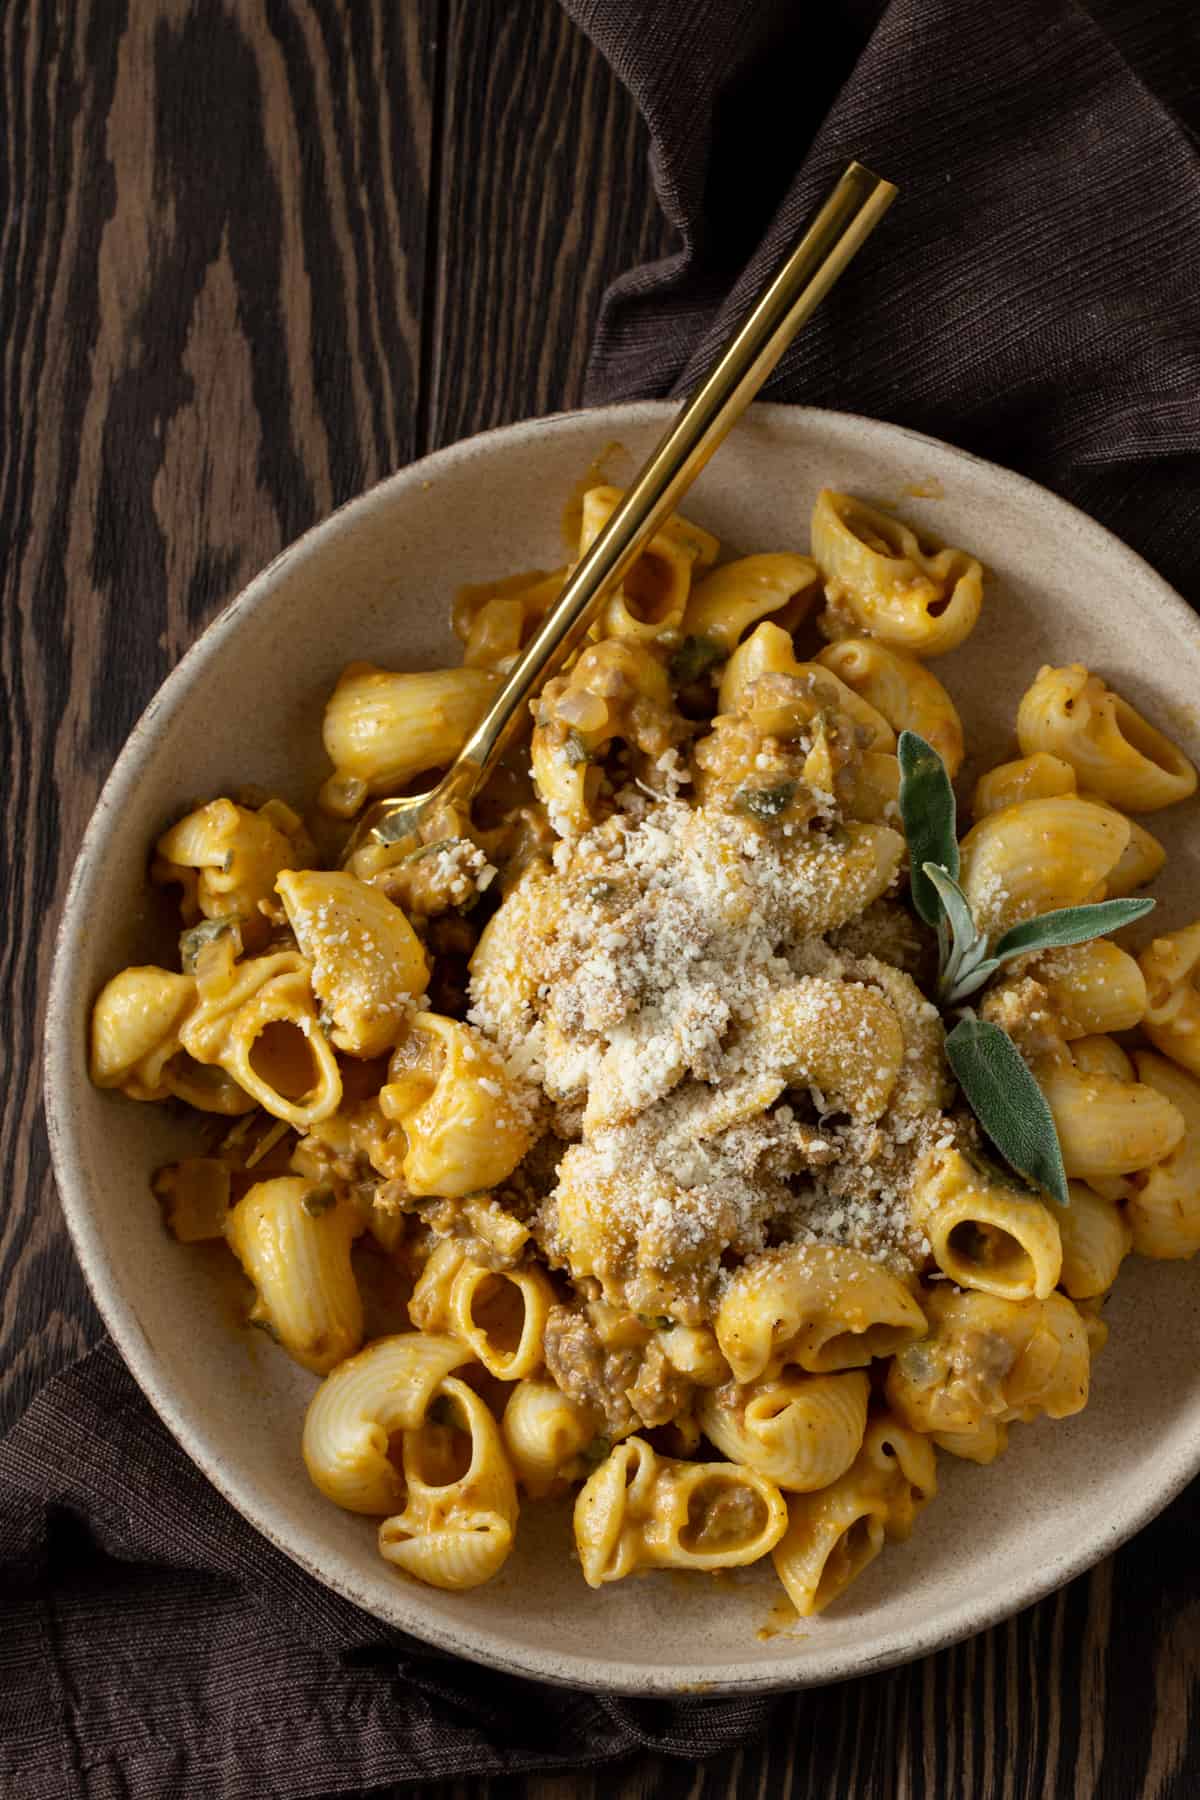 Pumpkin and sausage pasta in a bowl with a gold spoon.
